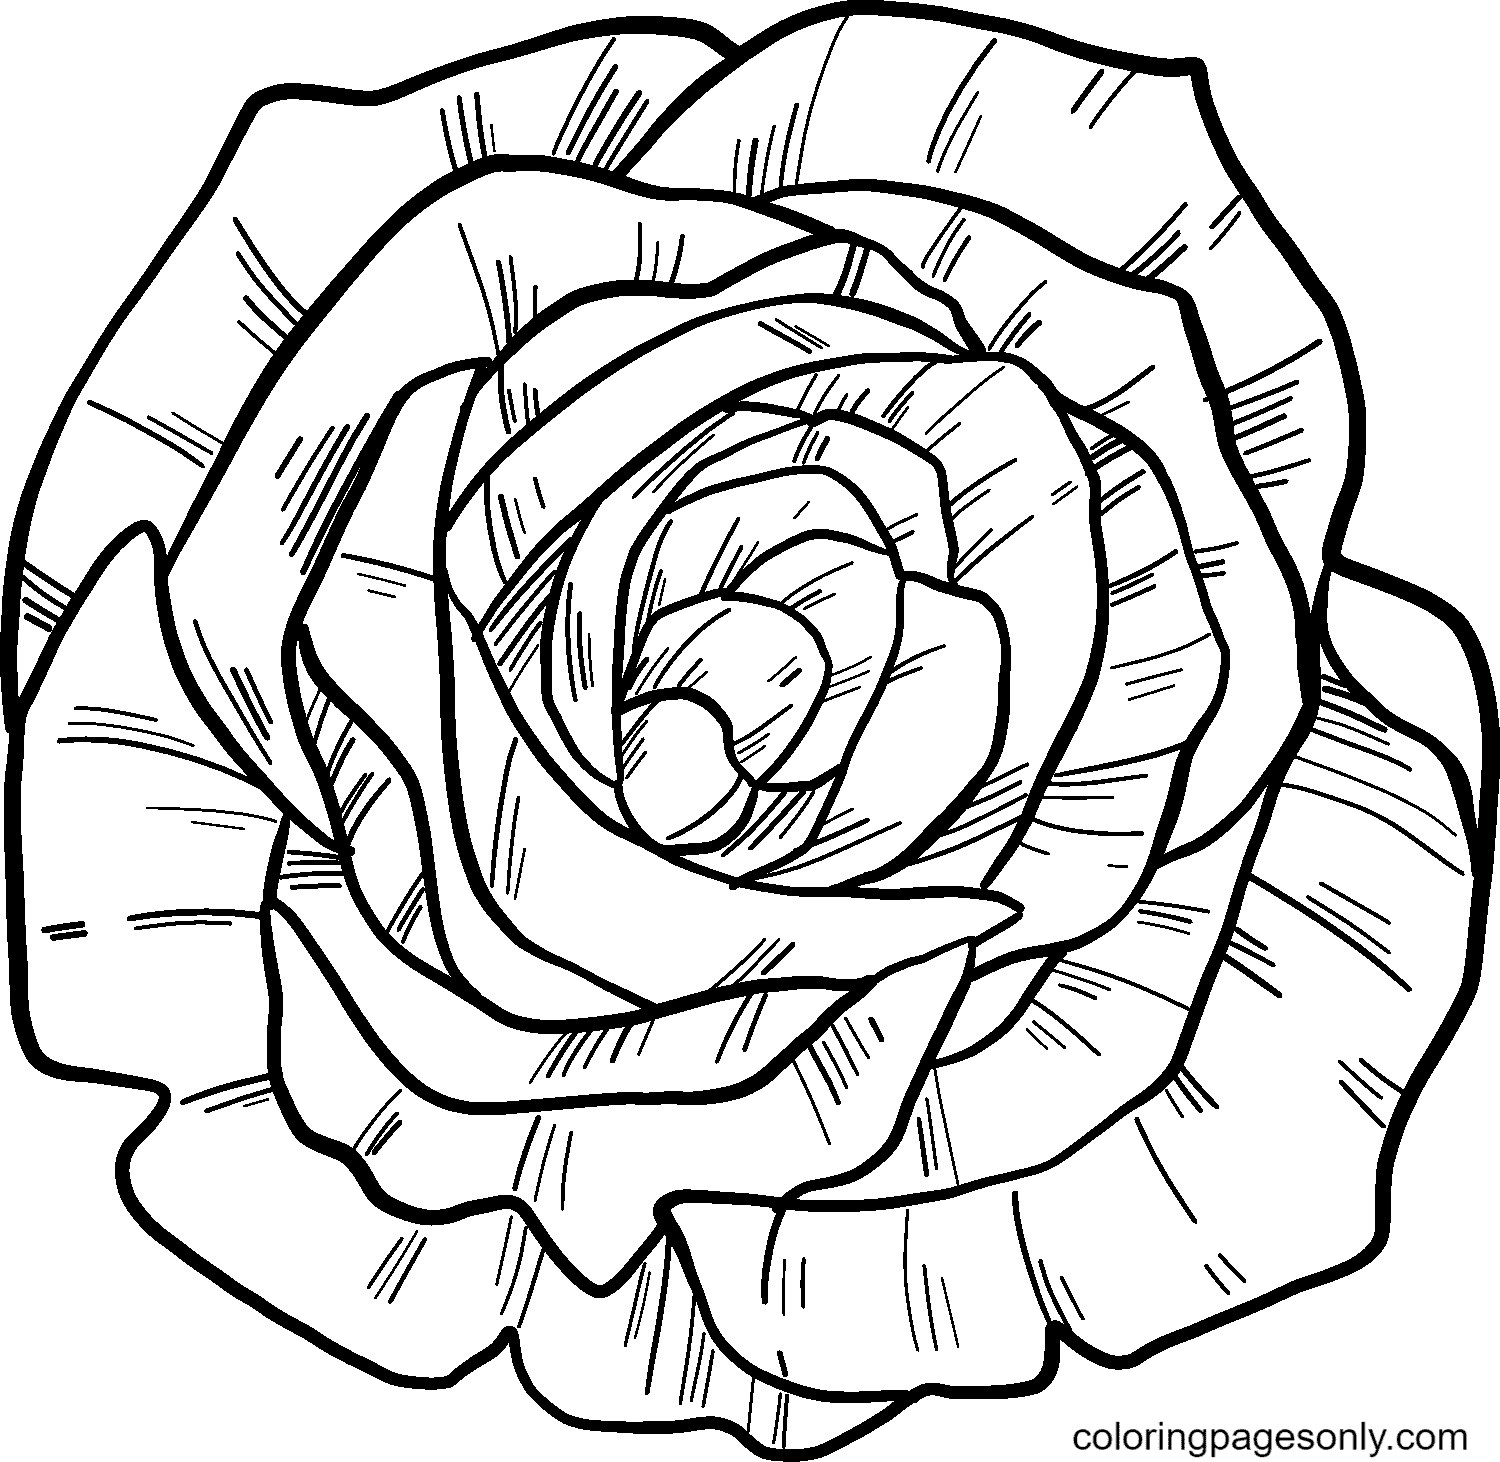 Big Rose Coloring Pages